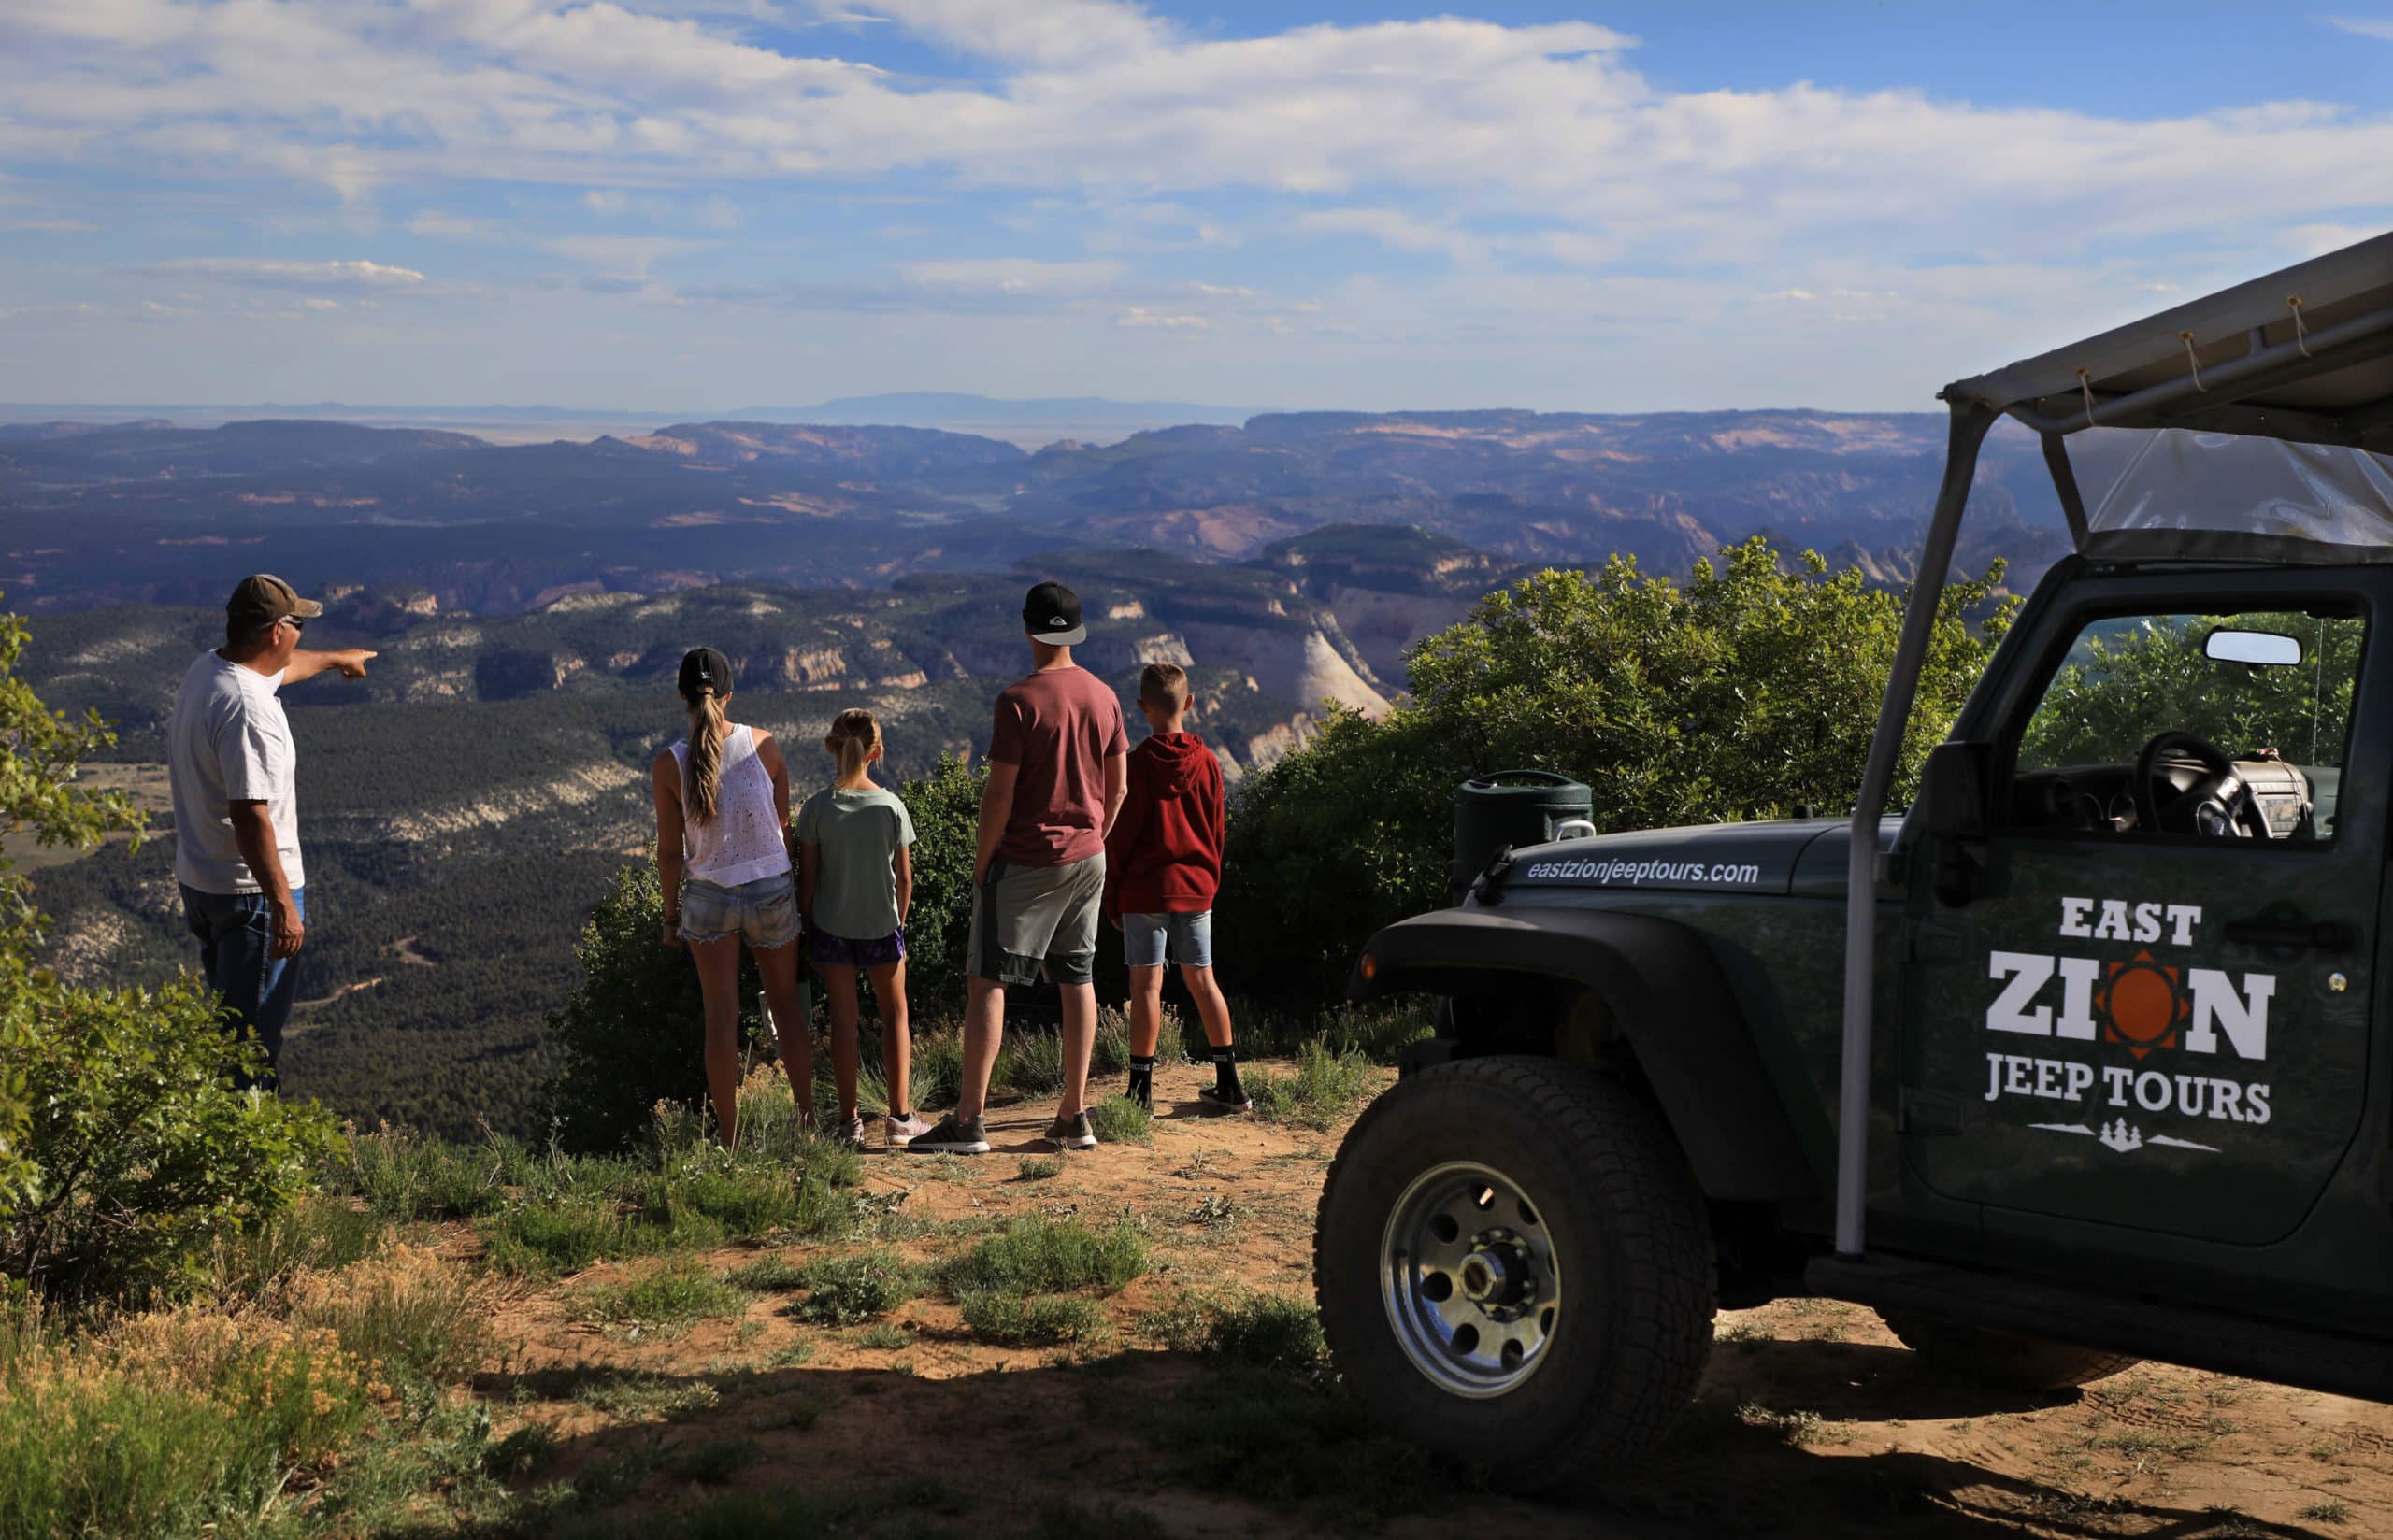 Featured image for “East Rim Jeep Tour”